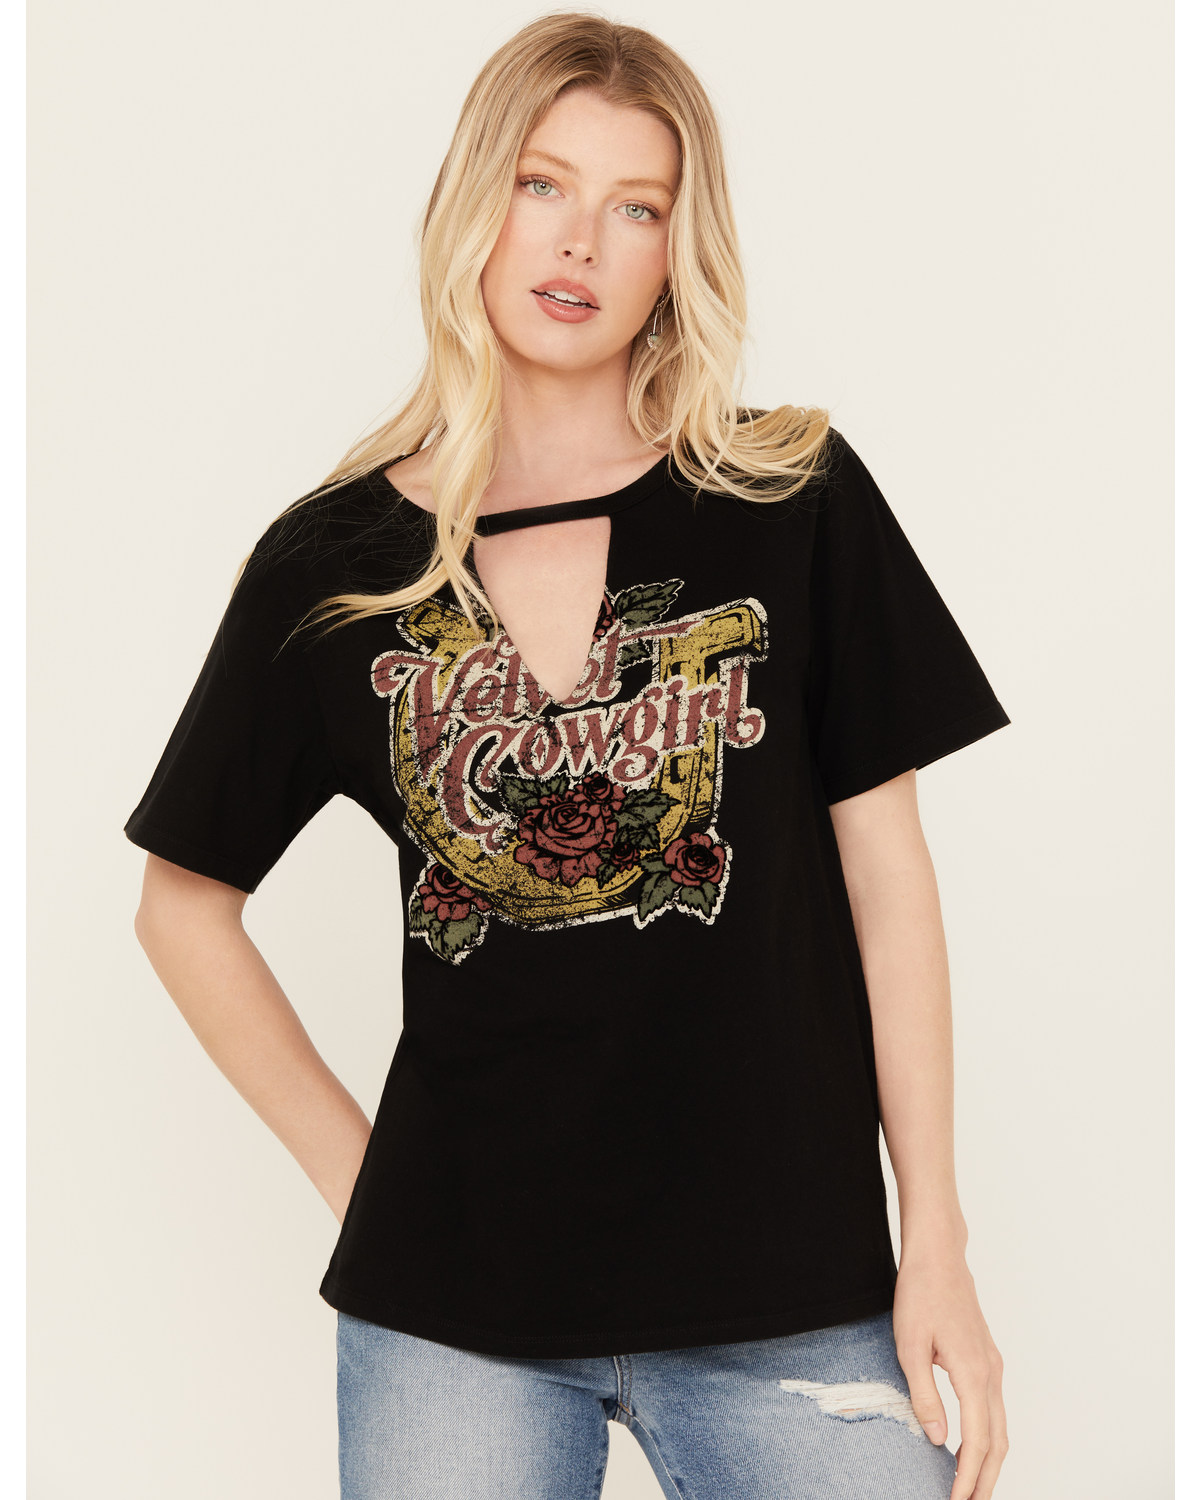 Idyllwind Women's Velvet Cowgirl Cut Out Graphic Tee